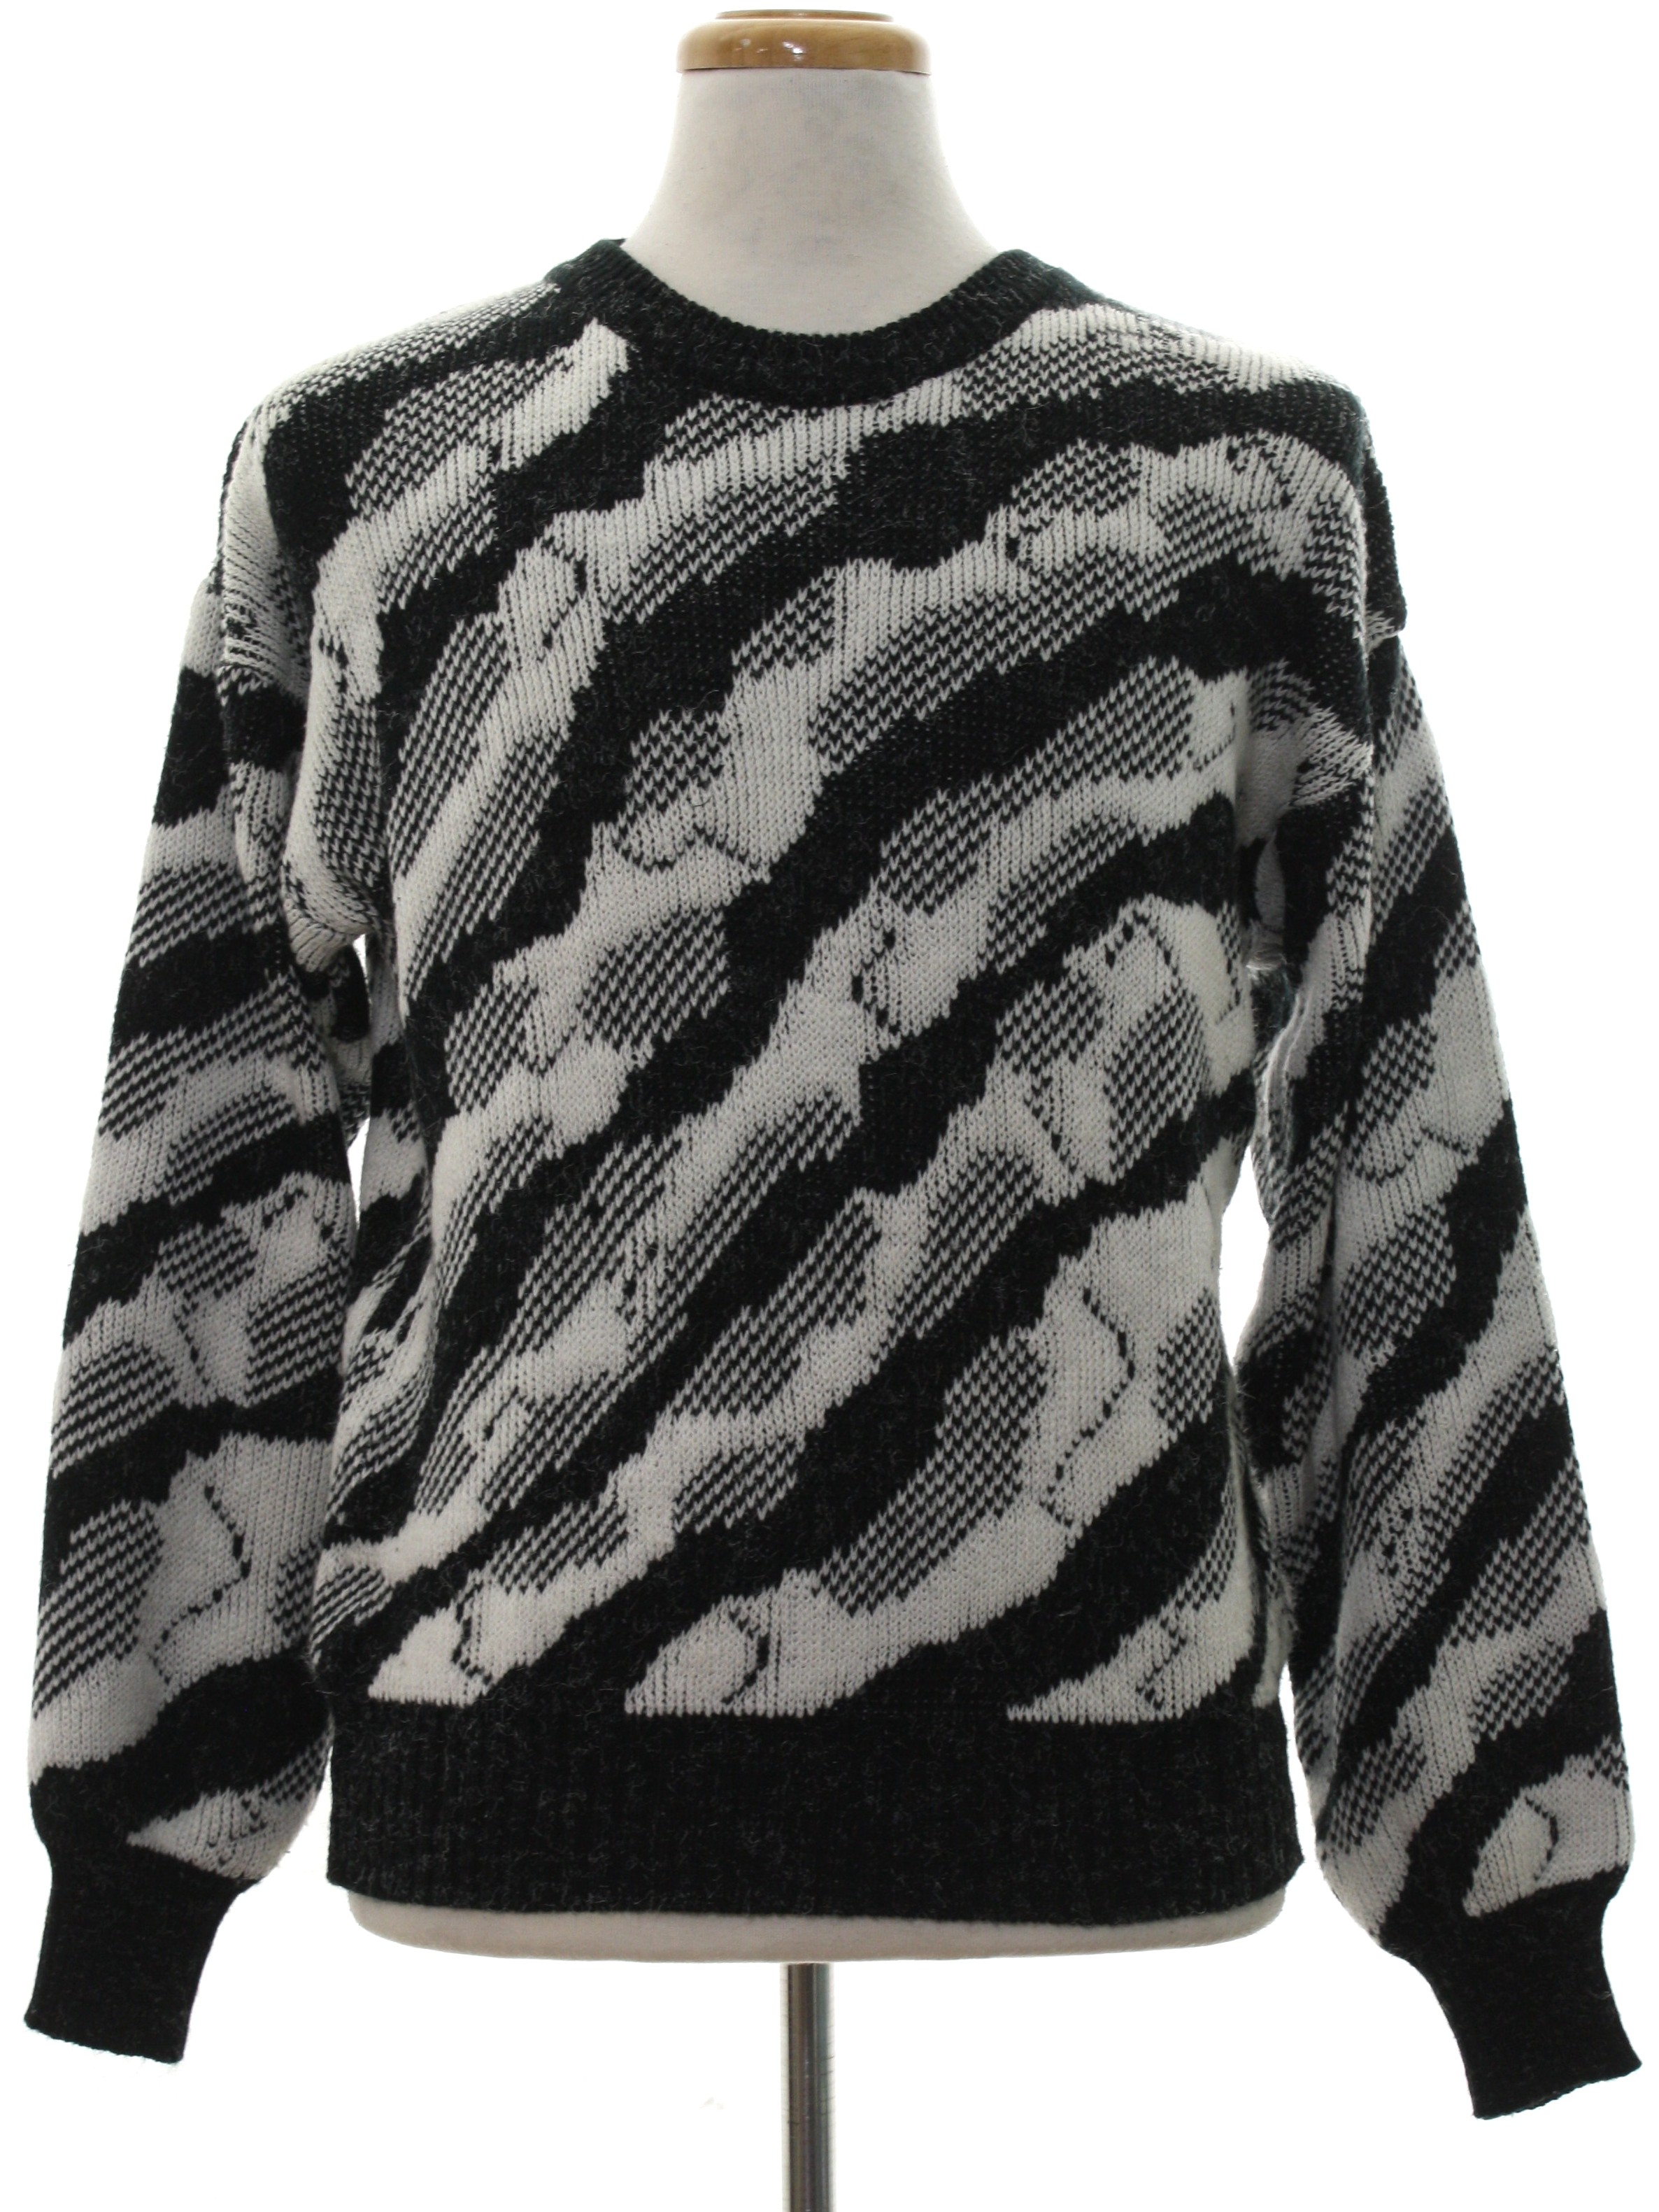 Retro 1980s Sweater: 80s -Limited Editions- Mens heathered black and ...